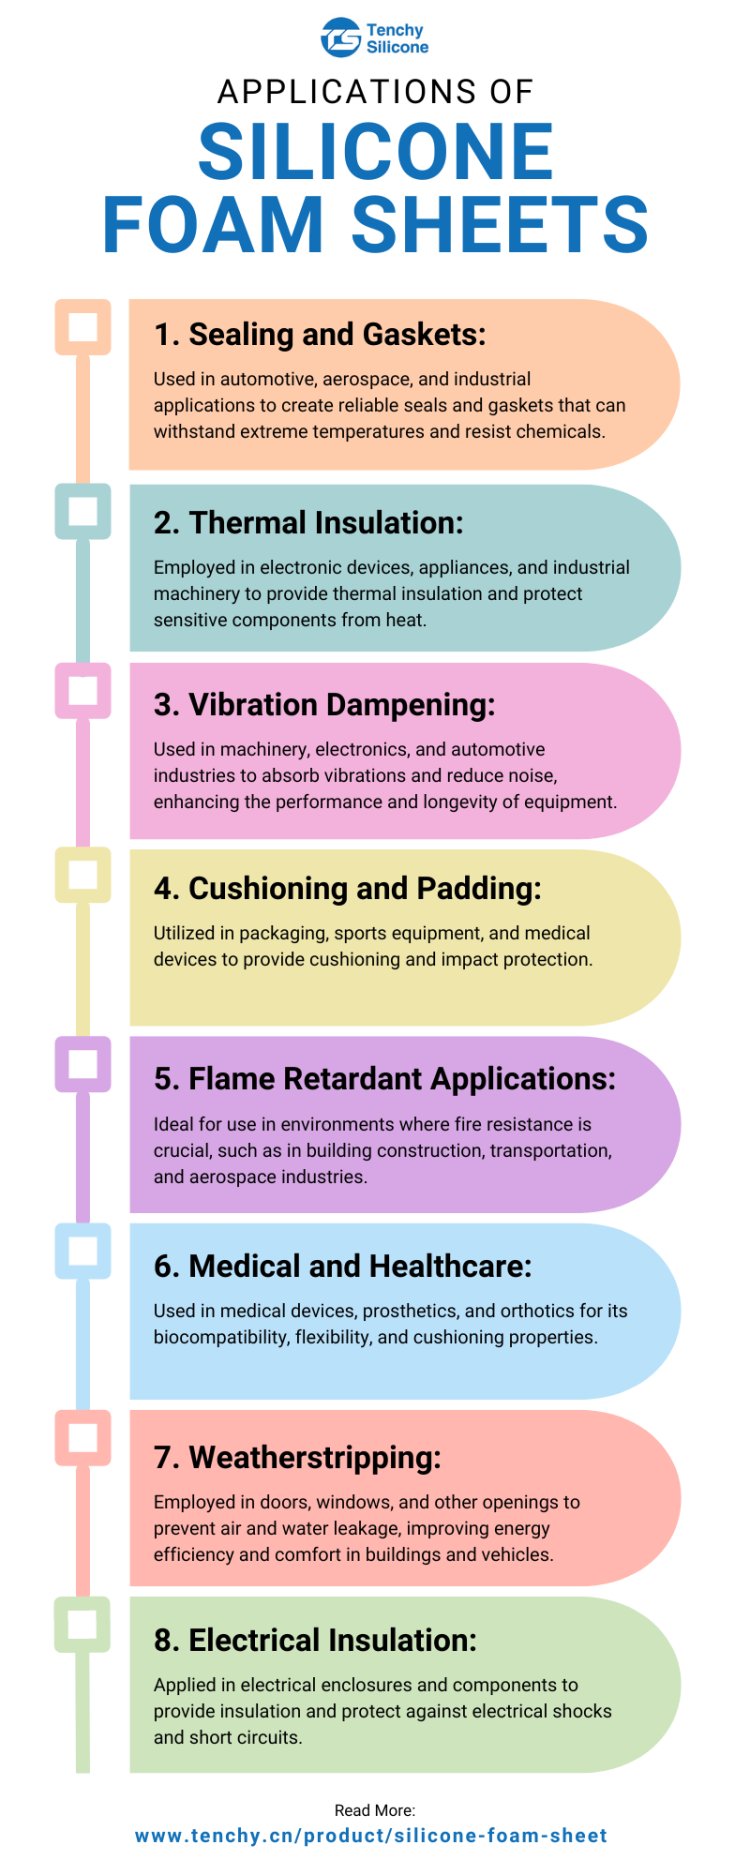 Applications of Silicone Foam Sheets [Infographic]